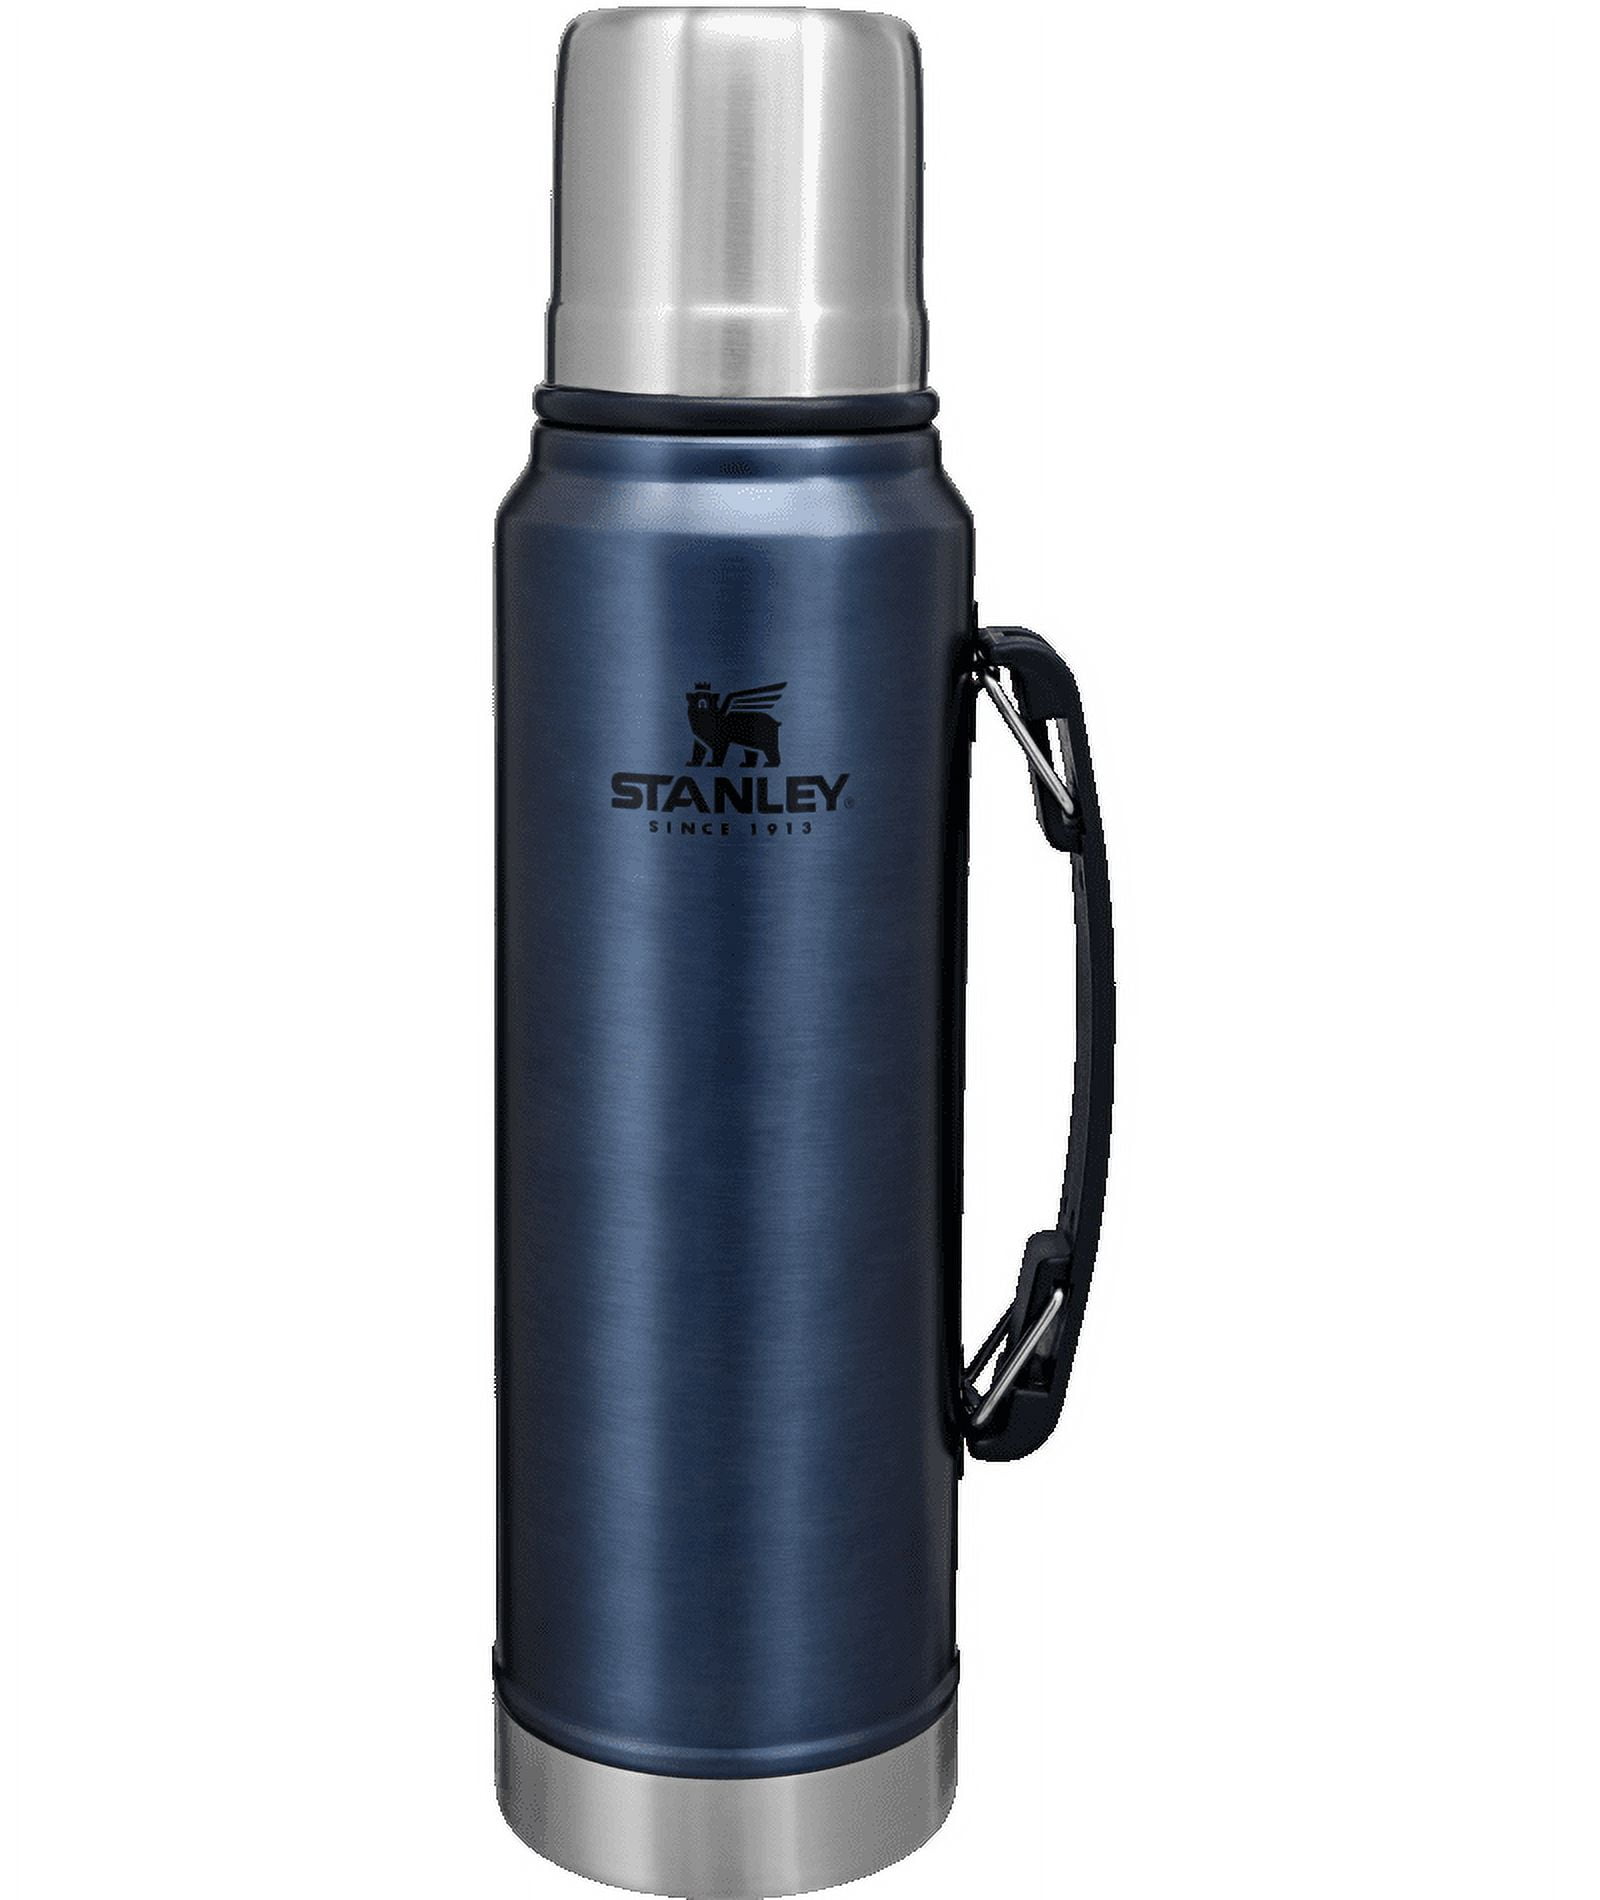 Stanley Classic Thermos Leak Proof Insulated Vacuum Bottle 1.1 qt